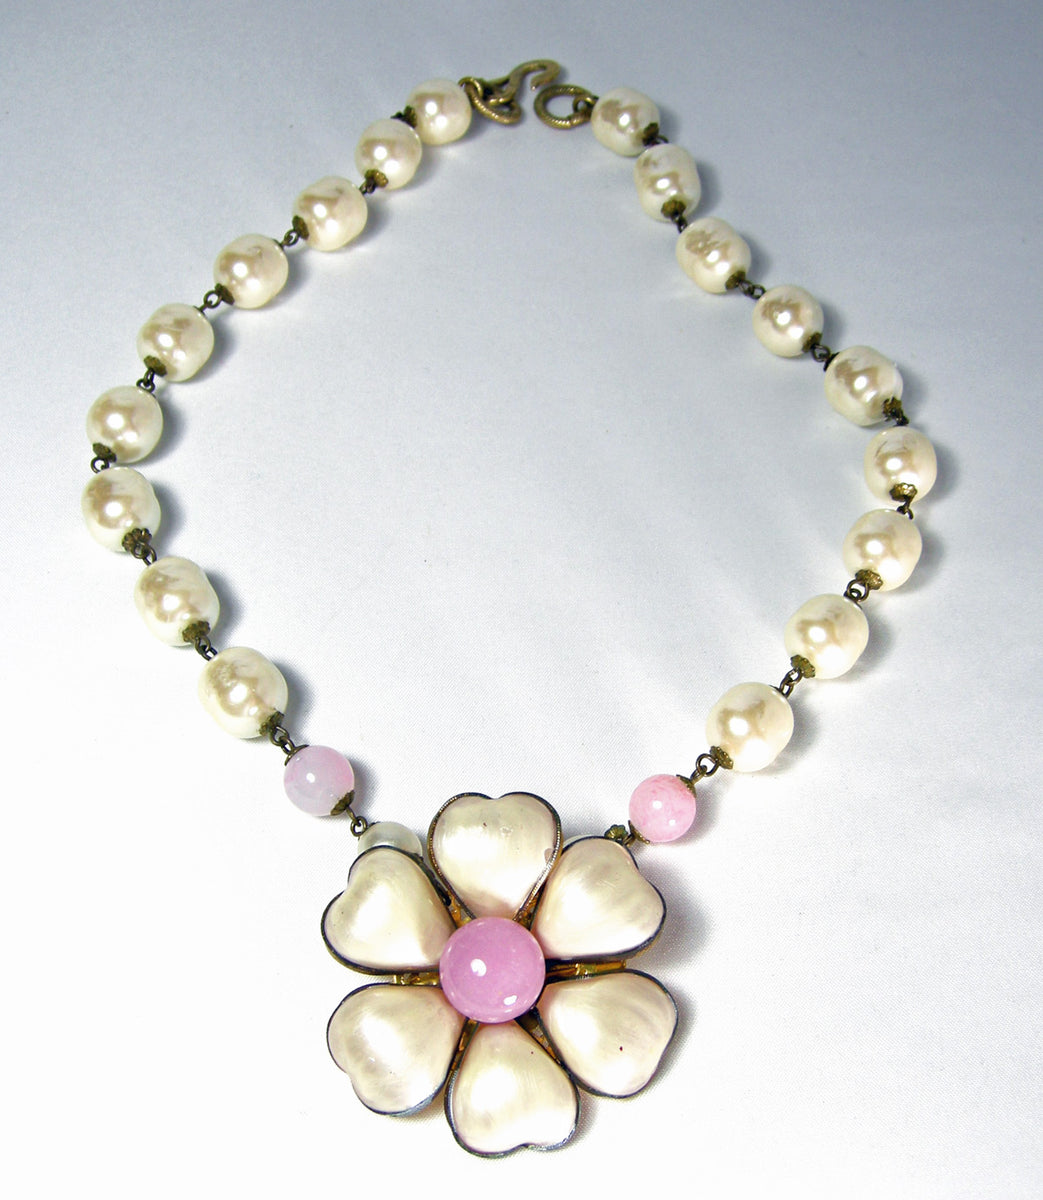 EARLY VINTAGE CHANEL PEARL NECKLACE & GRIPOIX 